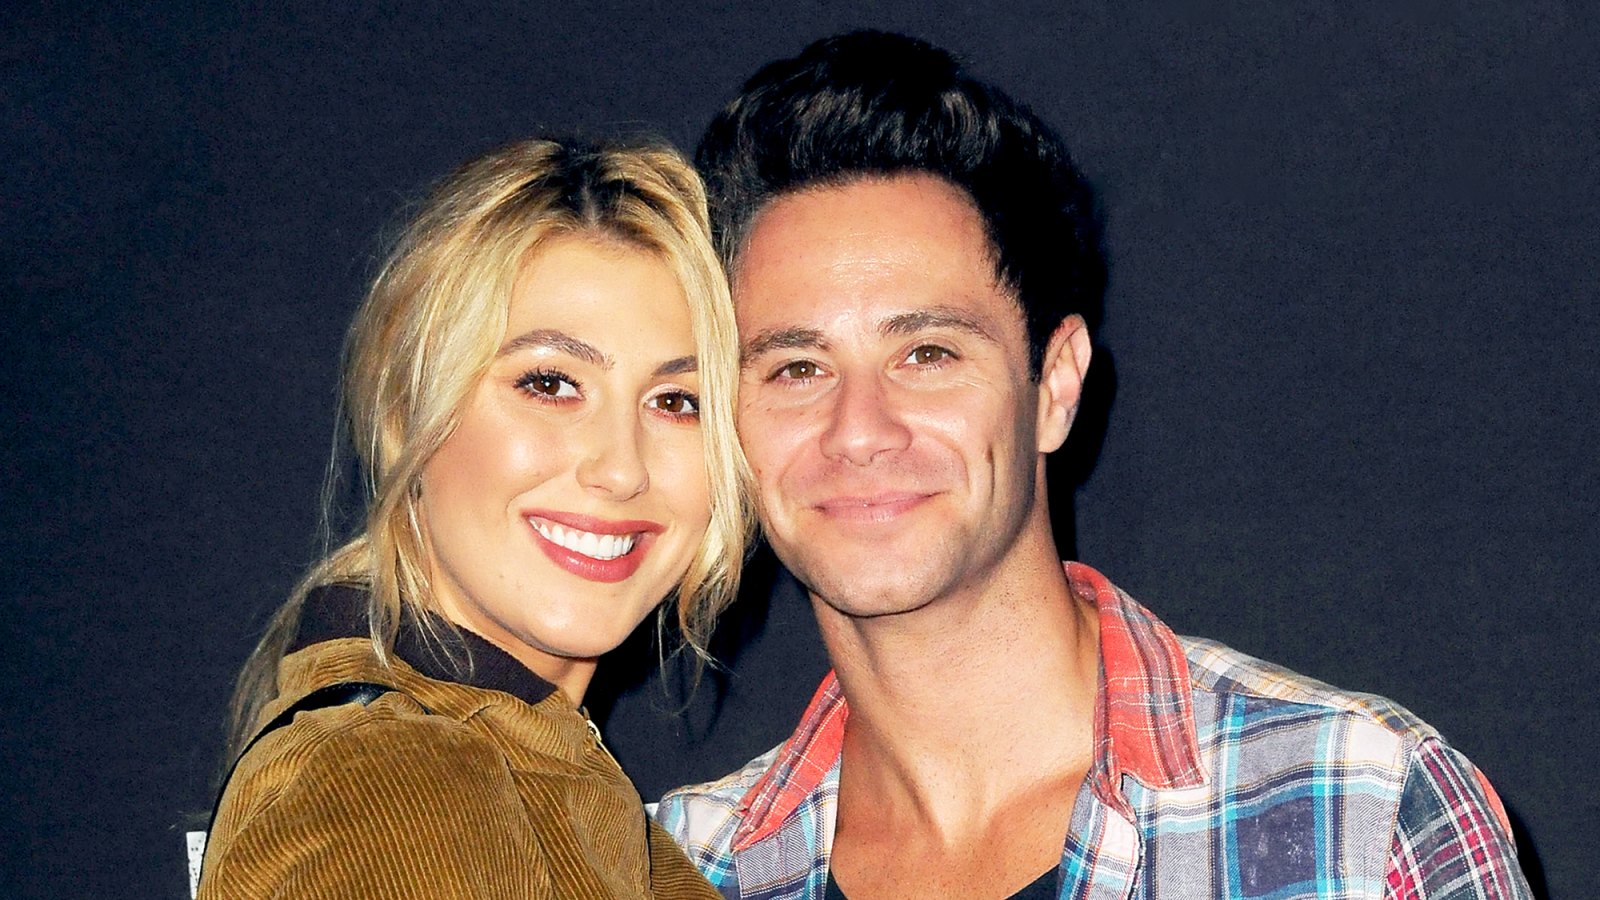 Emma Slater and Sasha Farber attend Knott's Scary Farm and Instagram Celebrity Night at Knott's Berry Farm in Buena Park, California.